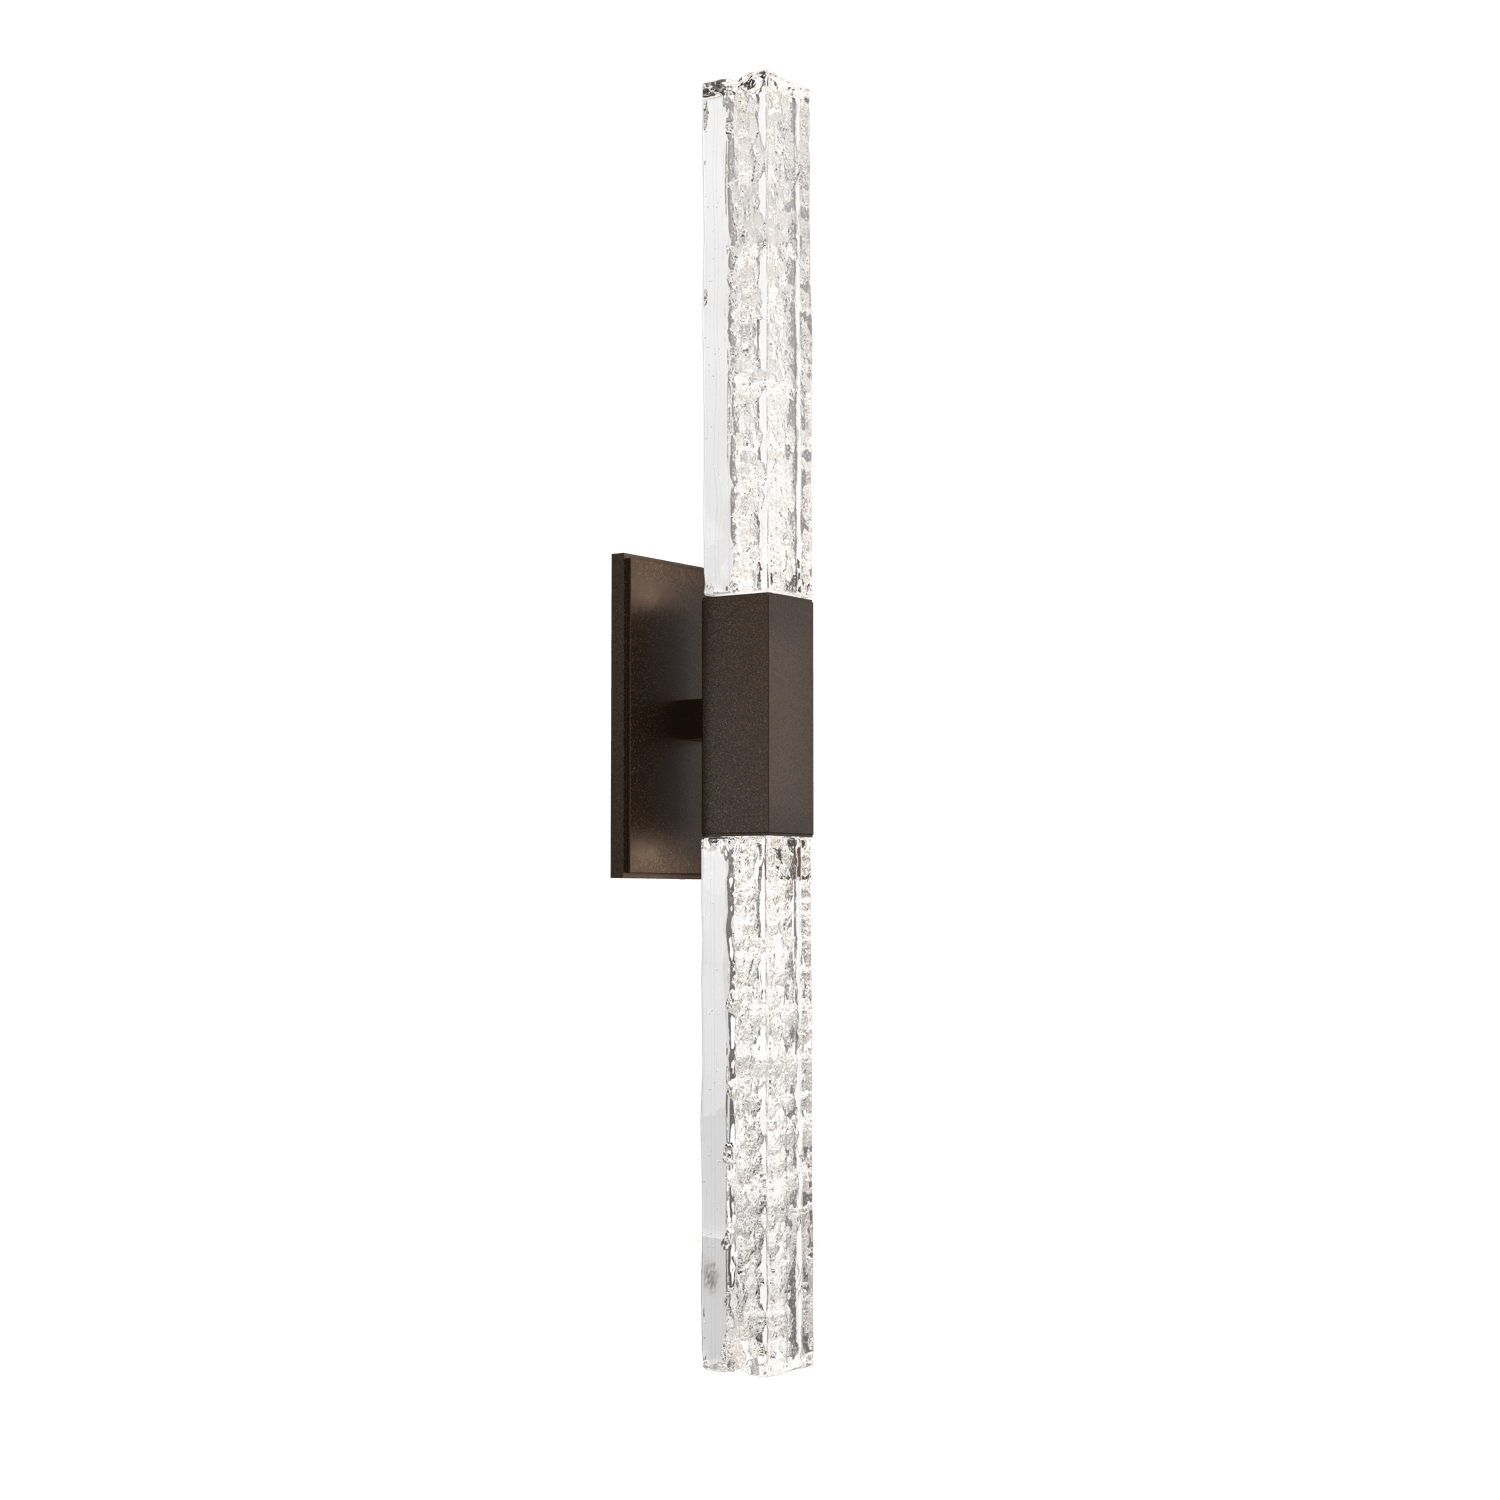 IDB0060-02-FB-GC-Hammerton-Studio-Axis-Double-Wall-Sconce-with-Flat-Bronze-finish-and-clear-cast-glass-and-LED-lamping